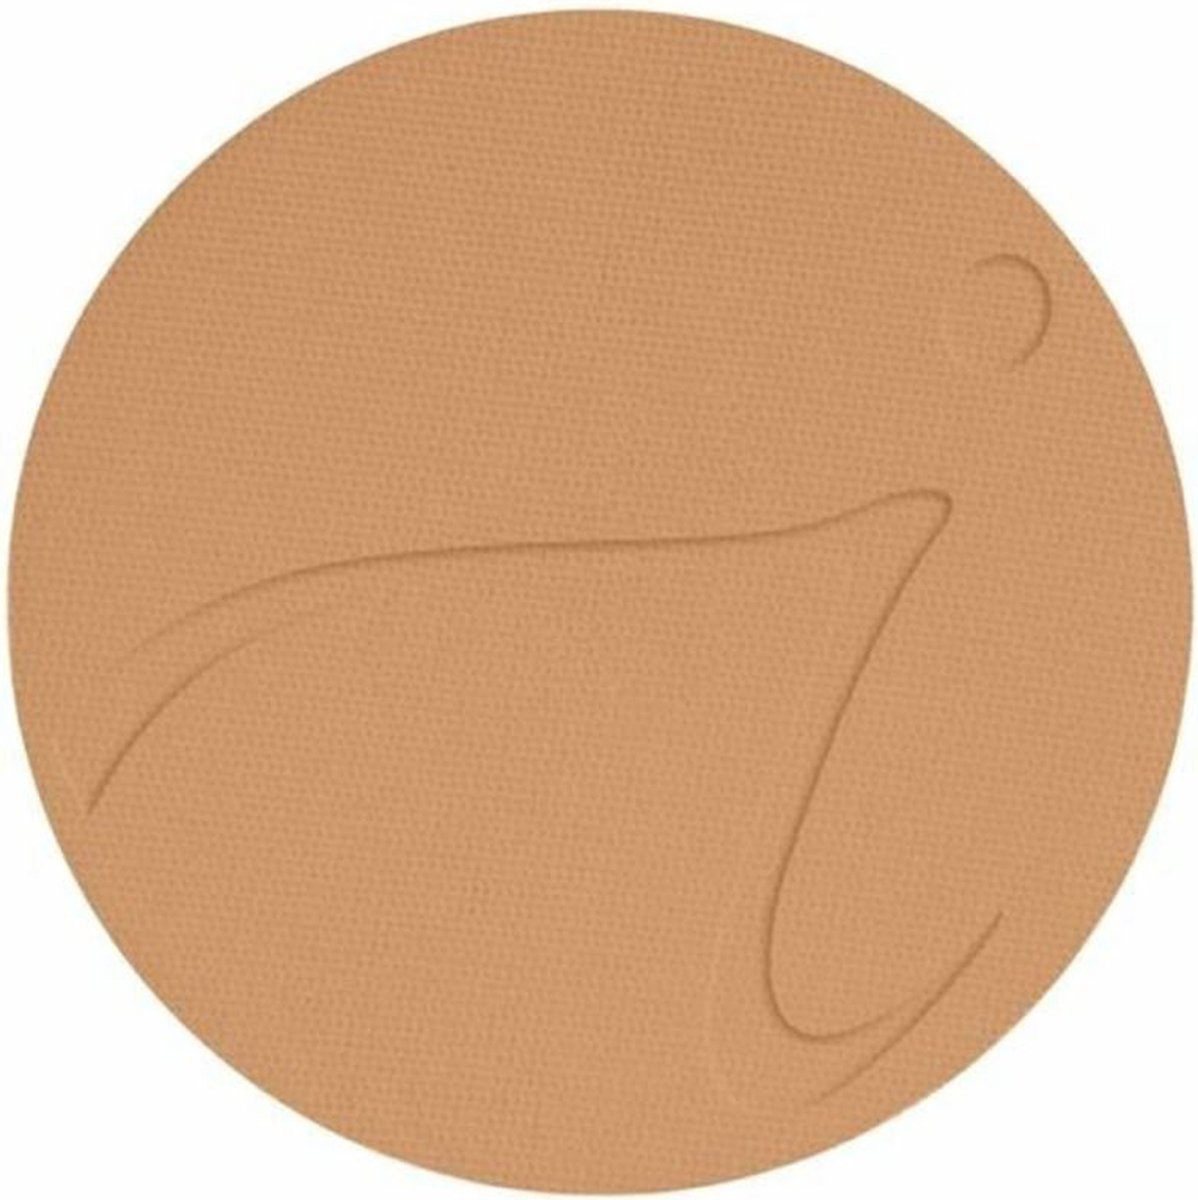 jane iredale Compact Poeder Face Make-Up PurePressed Base Mineral Foundation Refill Golden Tan